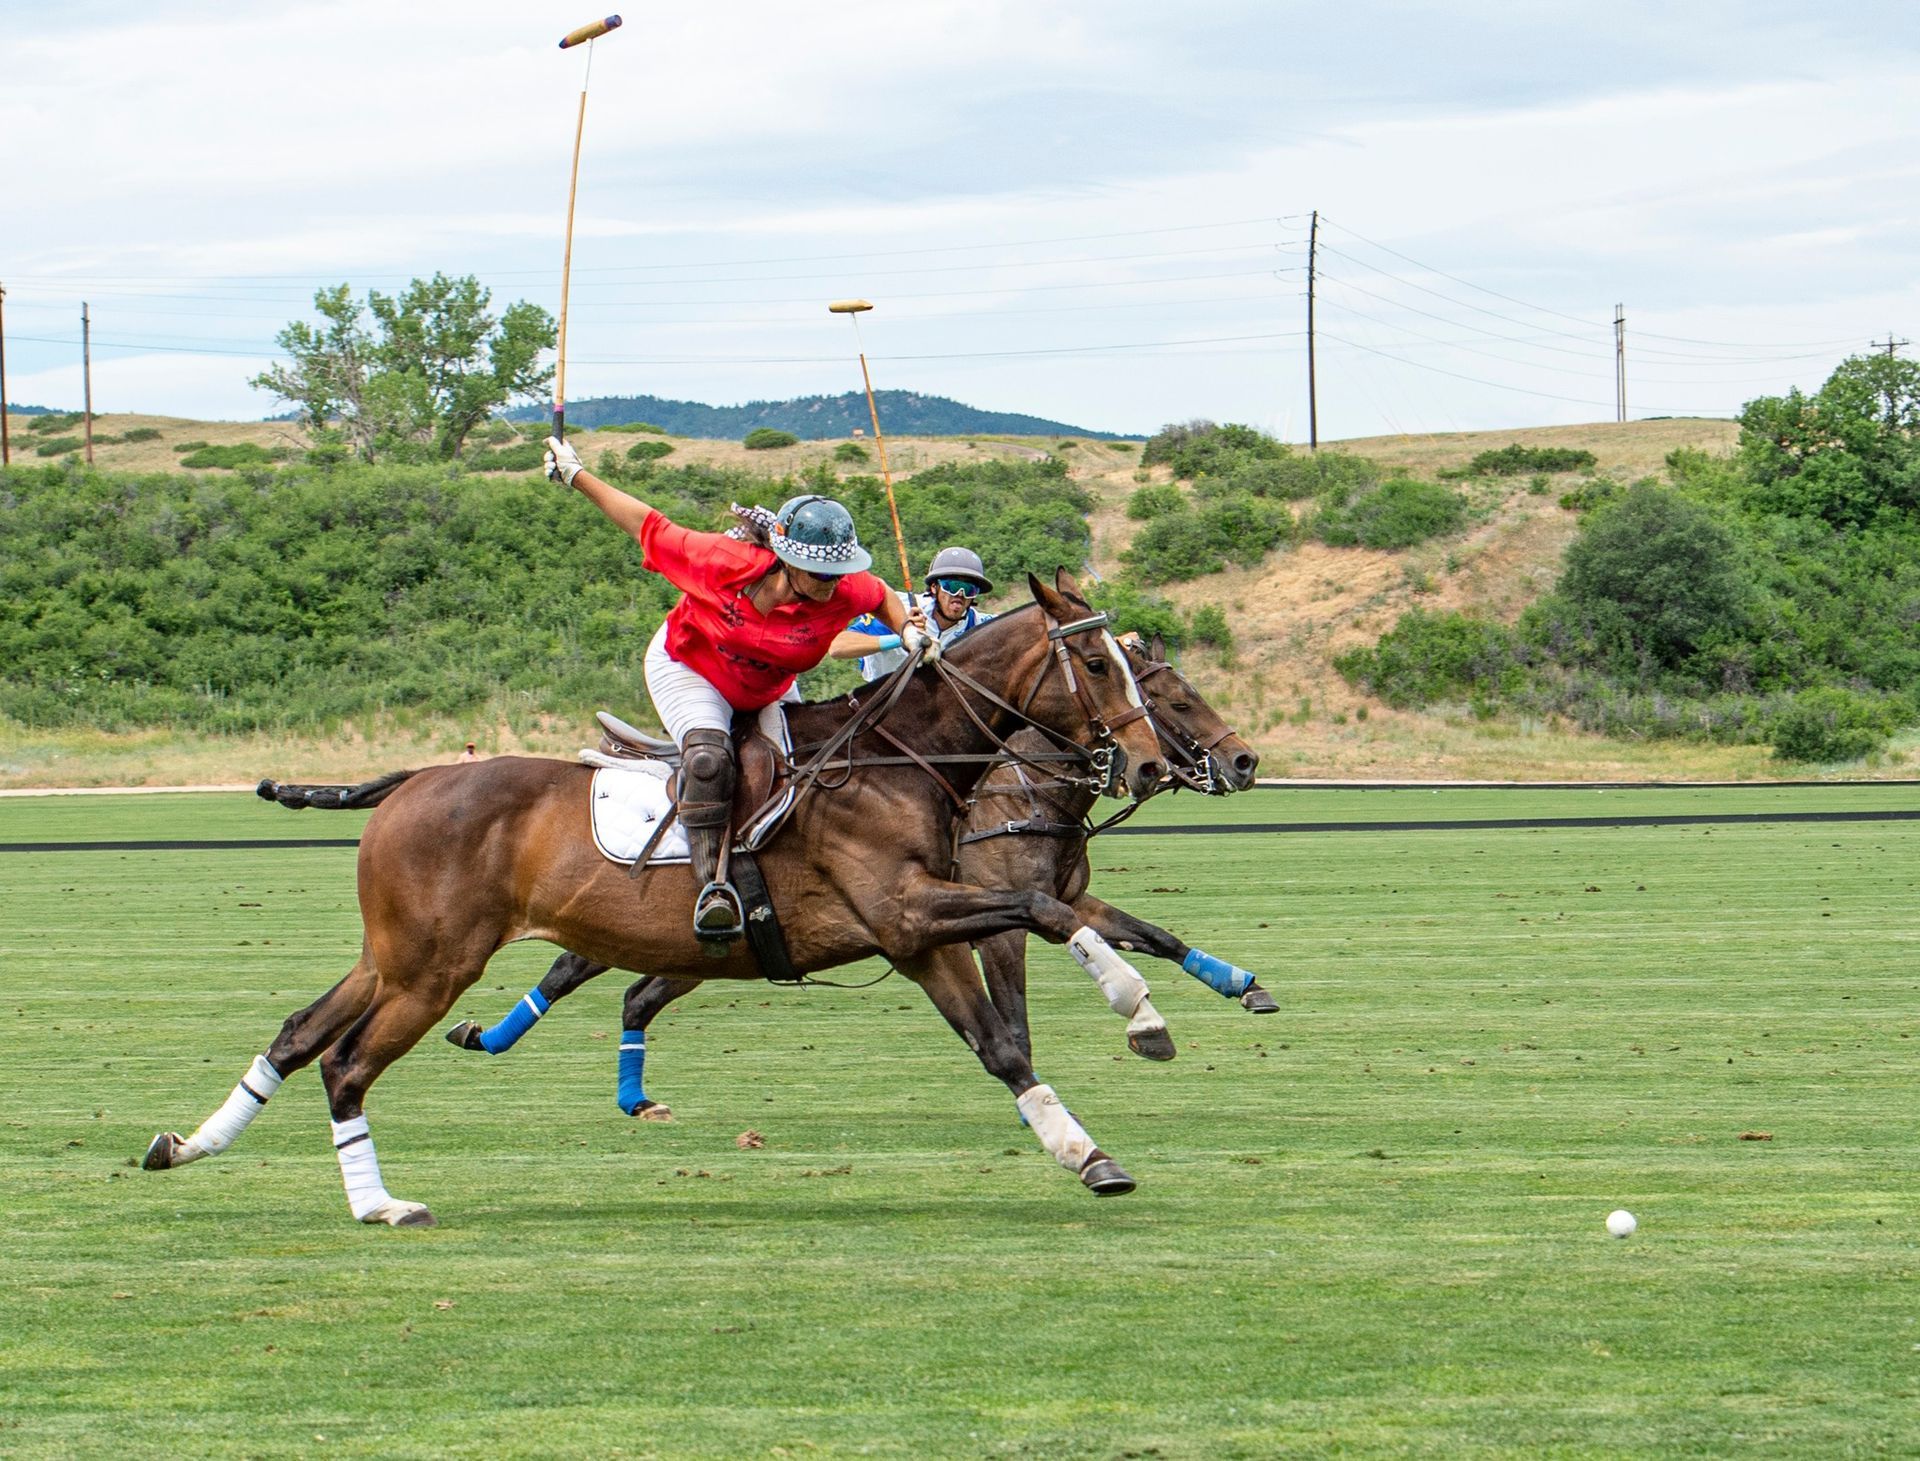 A man is riding a horse while playing polo on a field.